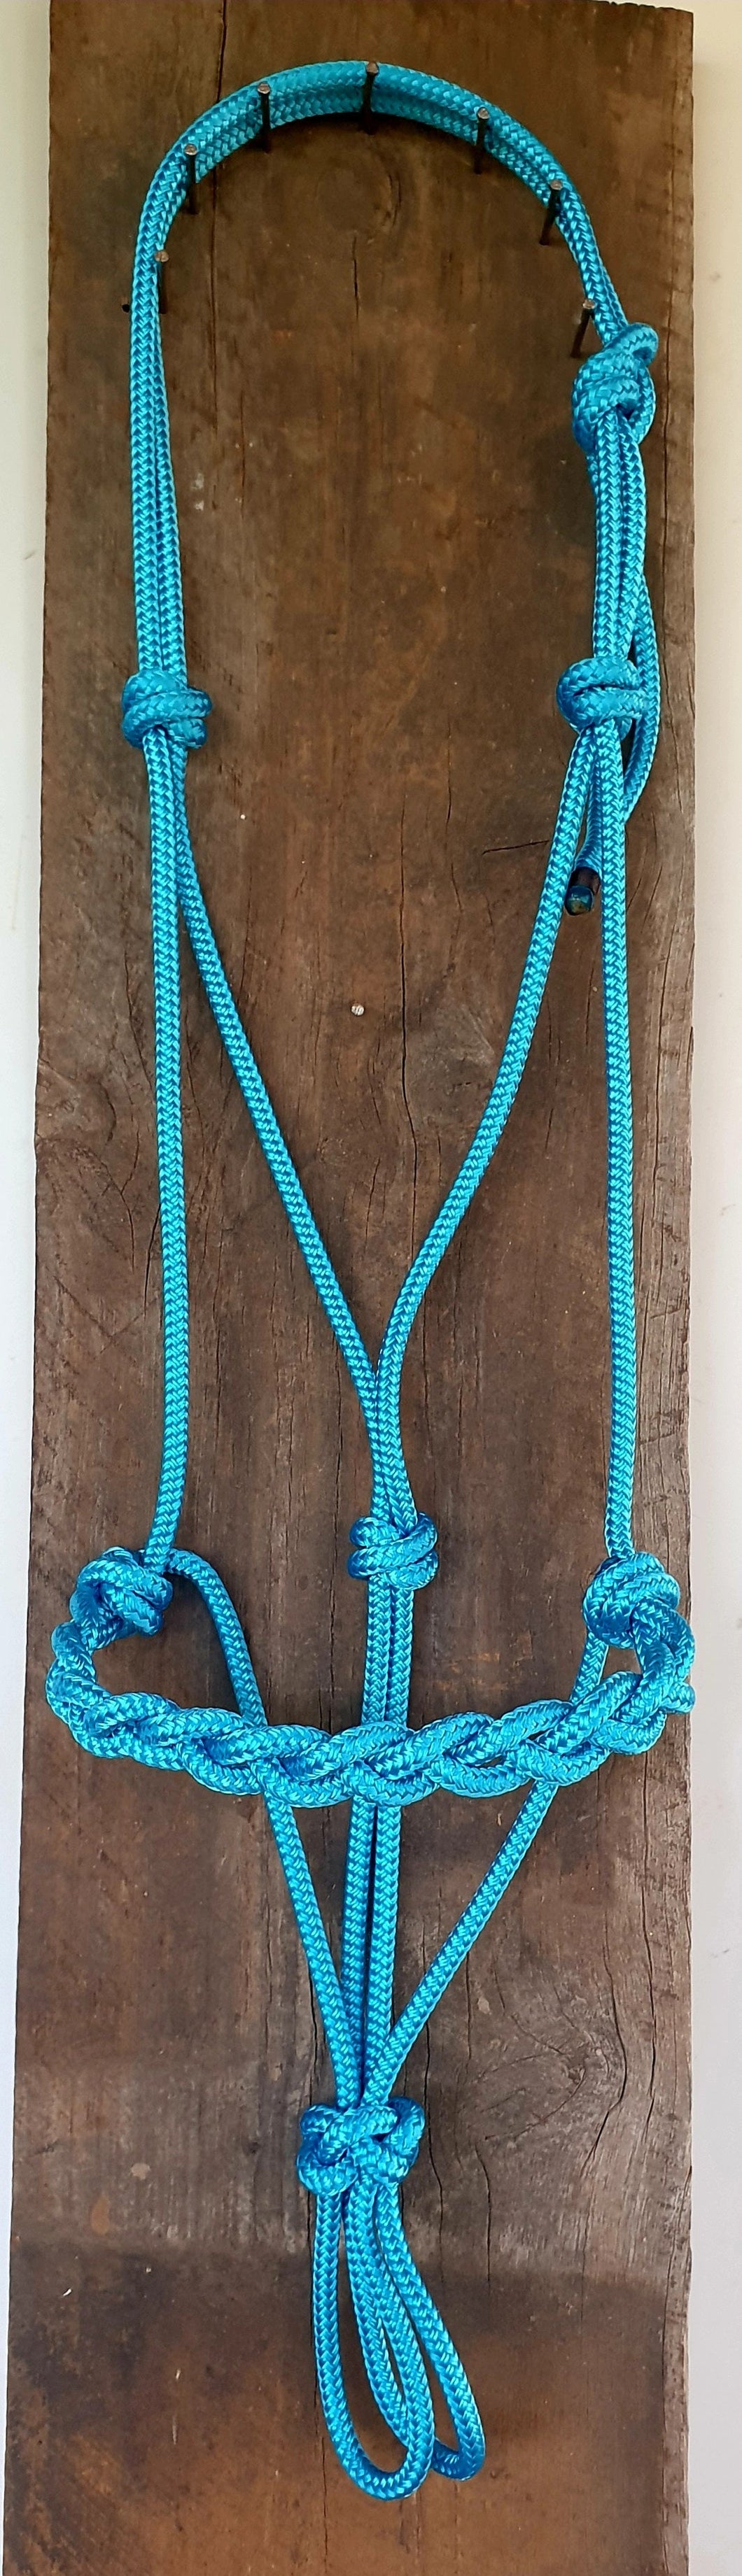 PLAITED NOSE ROPE HALTER - YEARLING/PONY